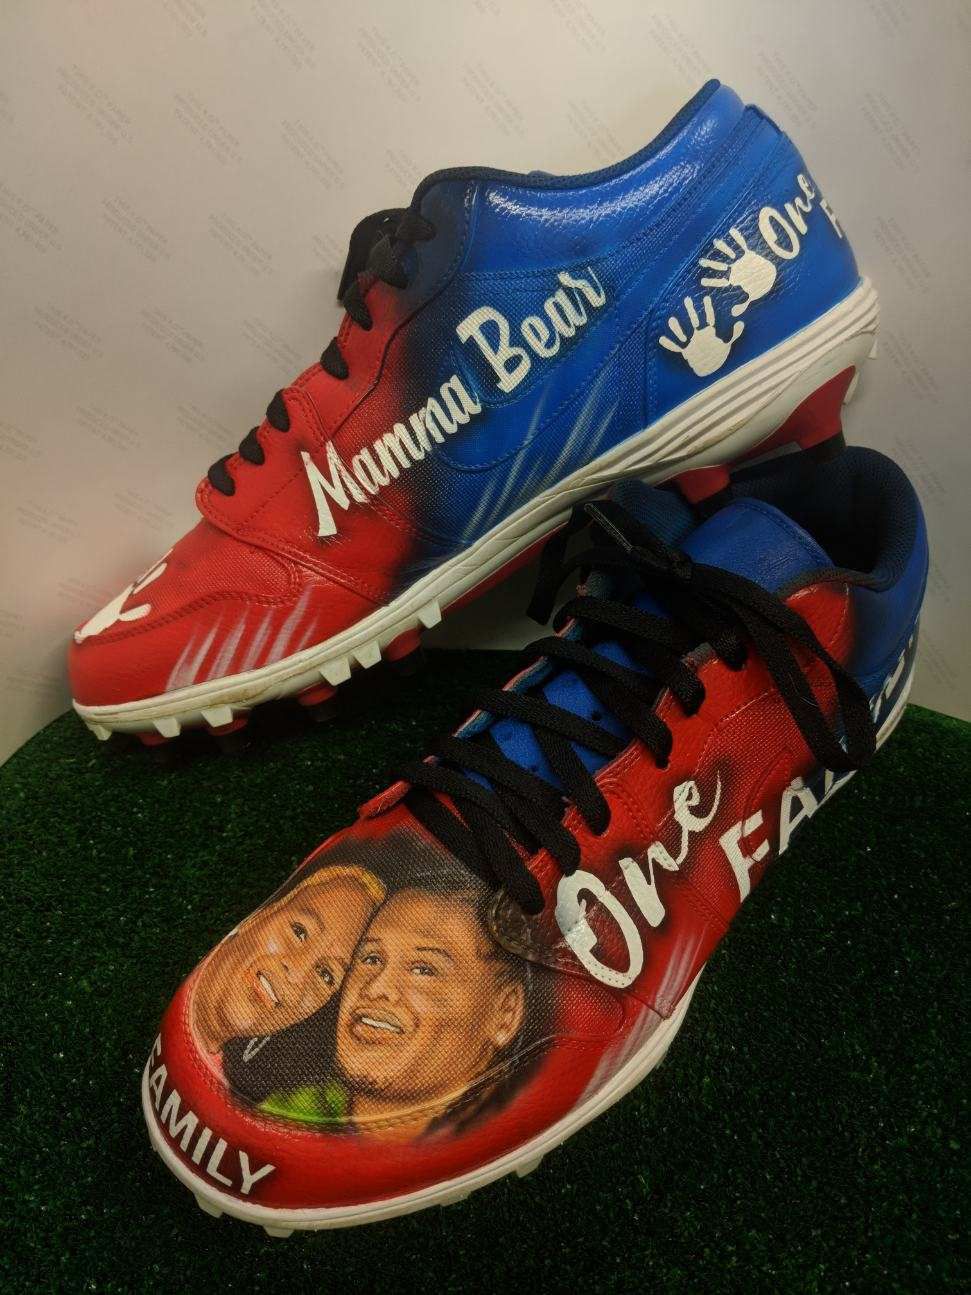 LV stepping 🔥👑 custom cleats made for @reemboi25 #broncos #nfl #tnf